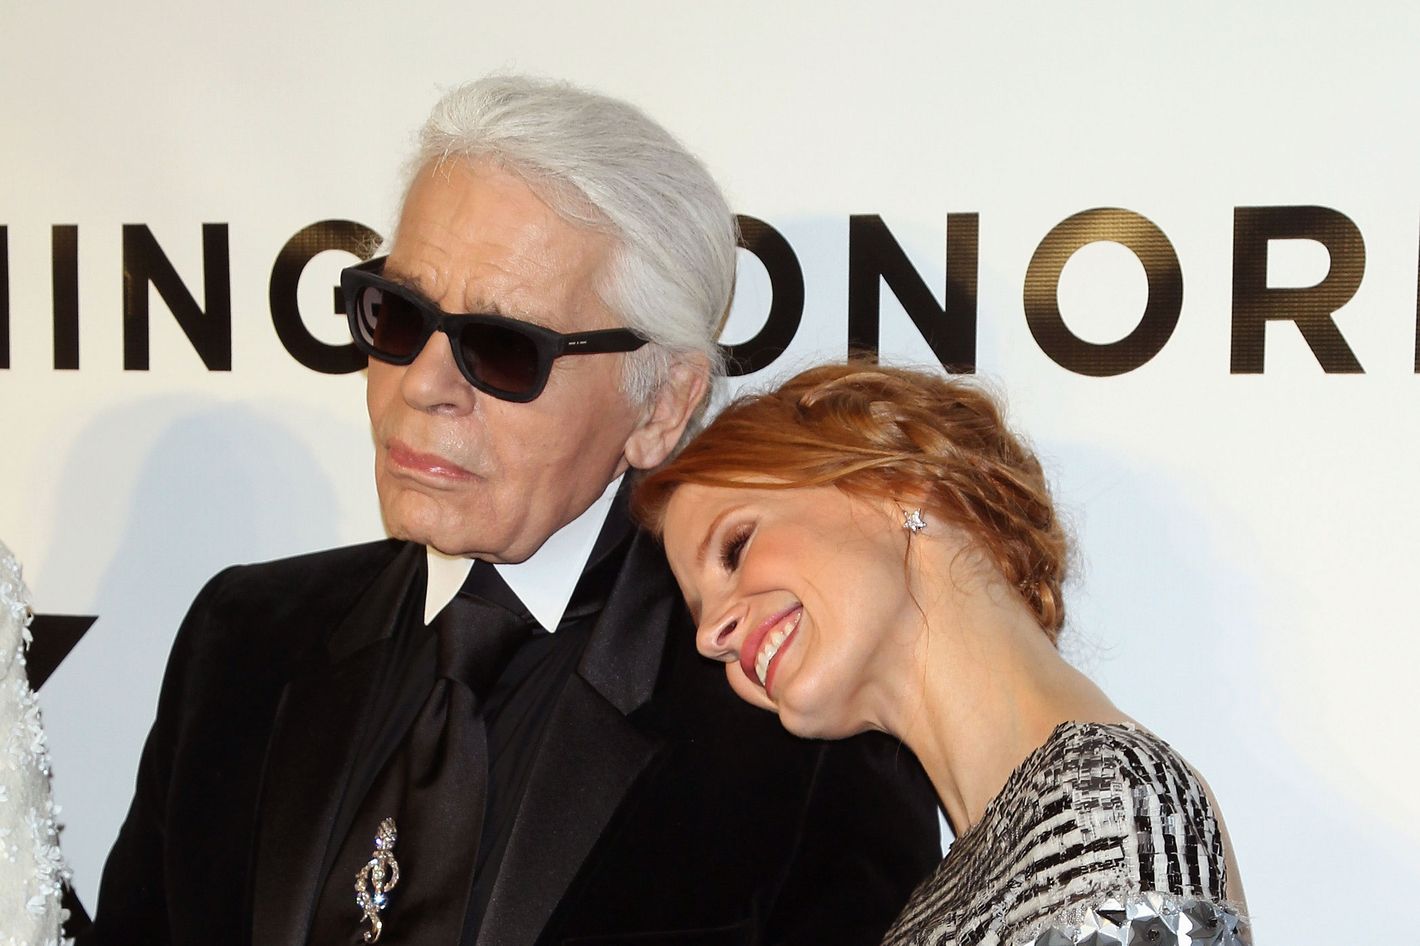 Karl Lagerfeld on Diets, Sobriety, and Becoming a Nicer Person